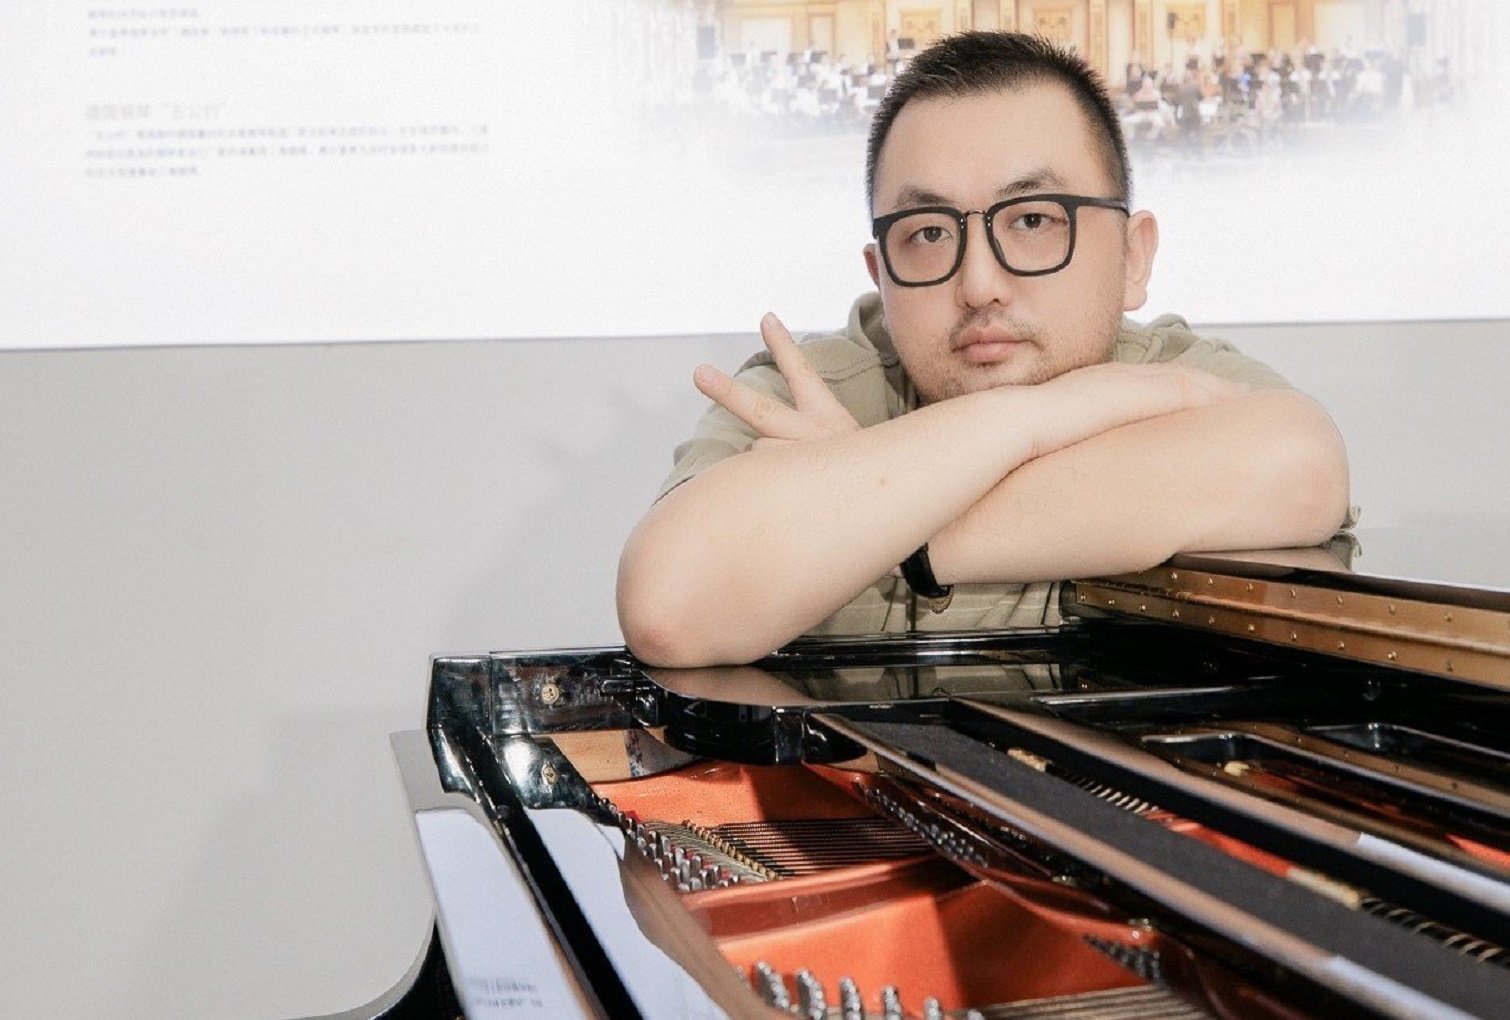 We welcome pianist Liu Aile in PETROF Art Family